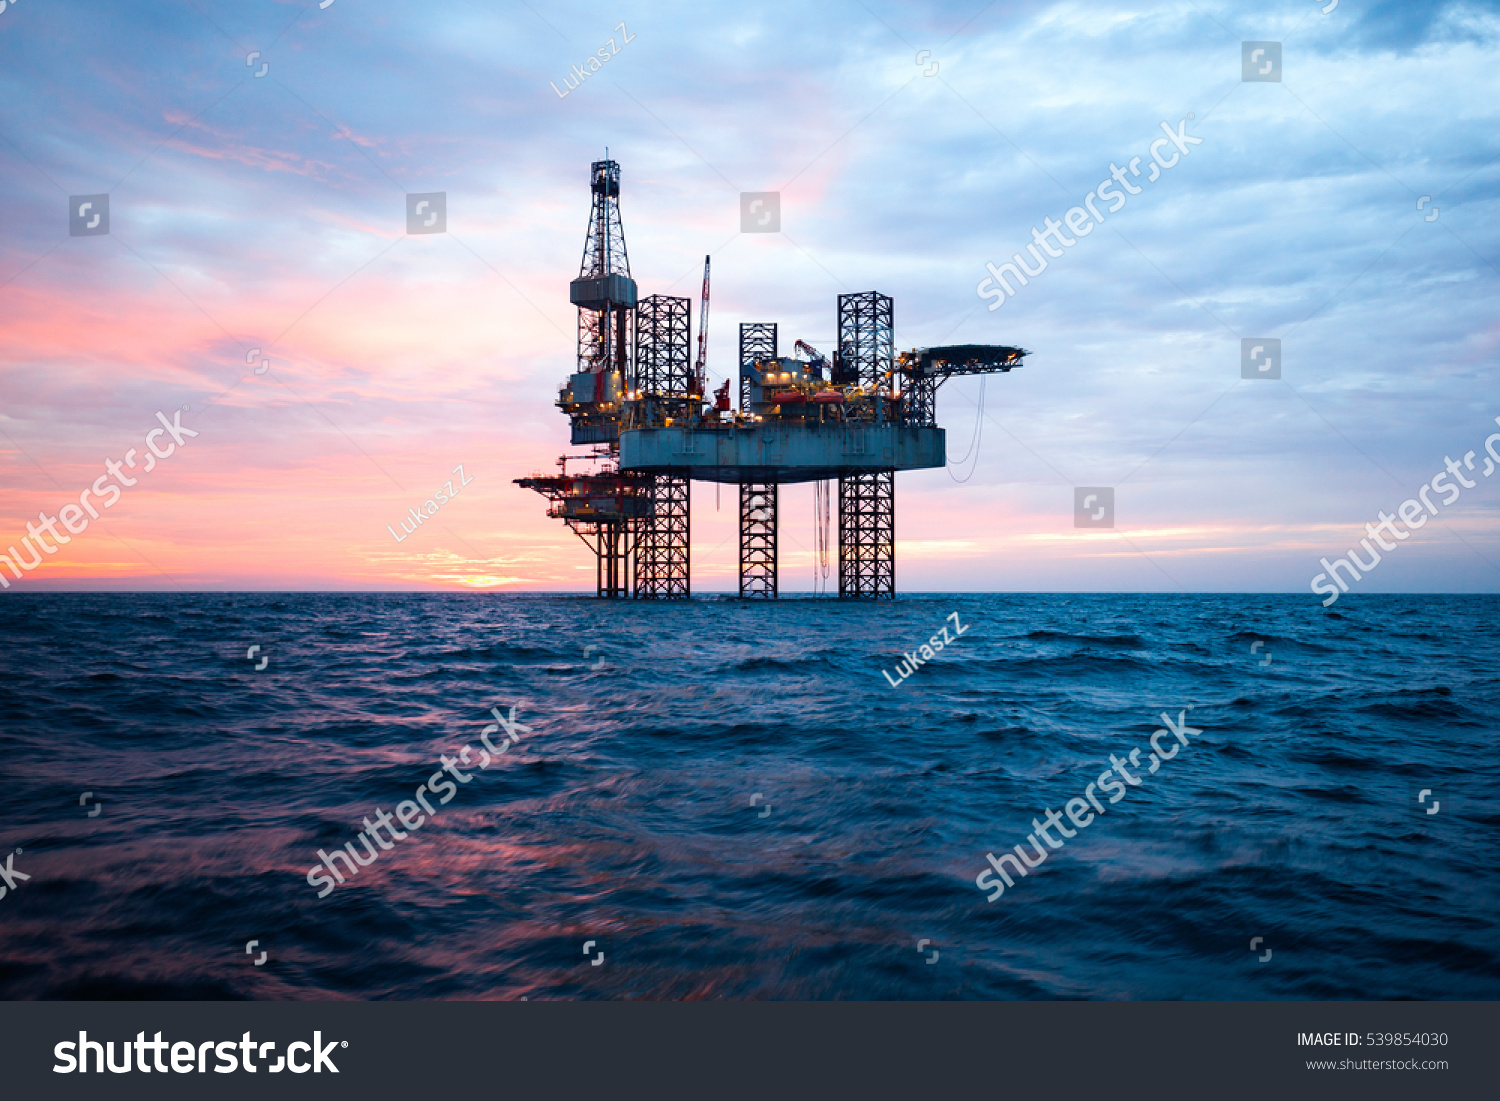 Offshore Jack Up Rig in The Middle of The Sea at Sunset Time #539854030